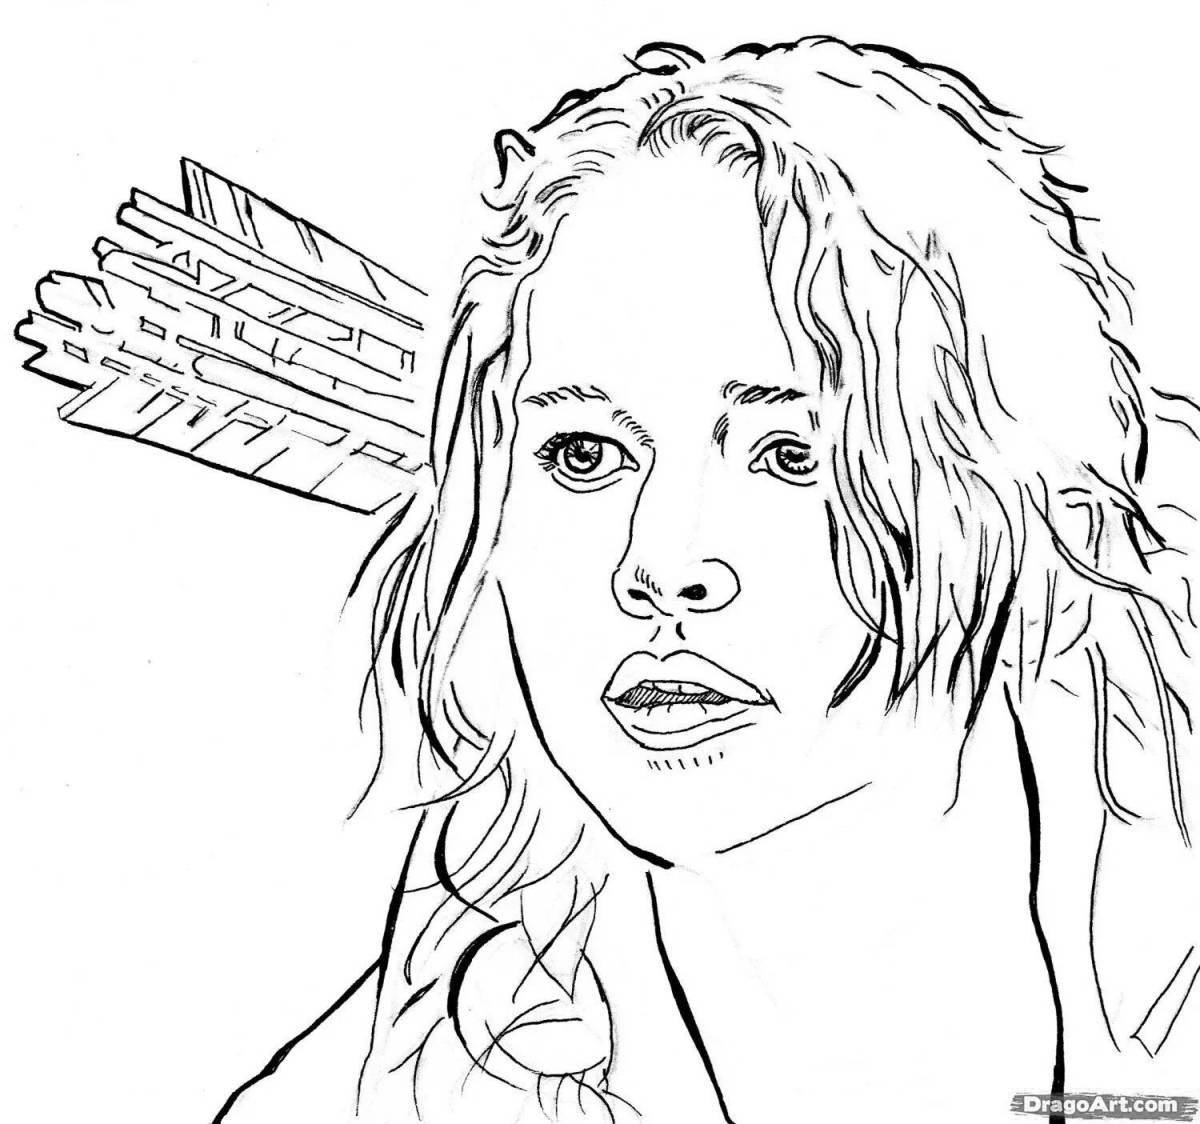 Hunger games coloring page